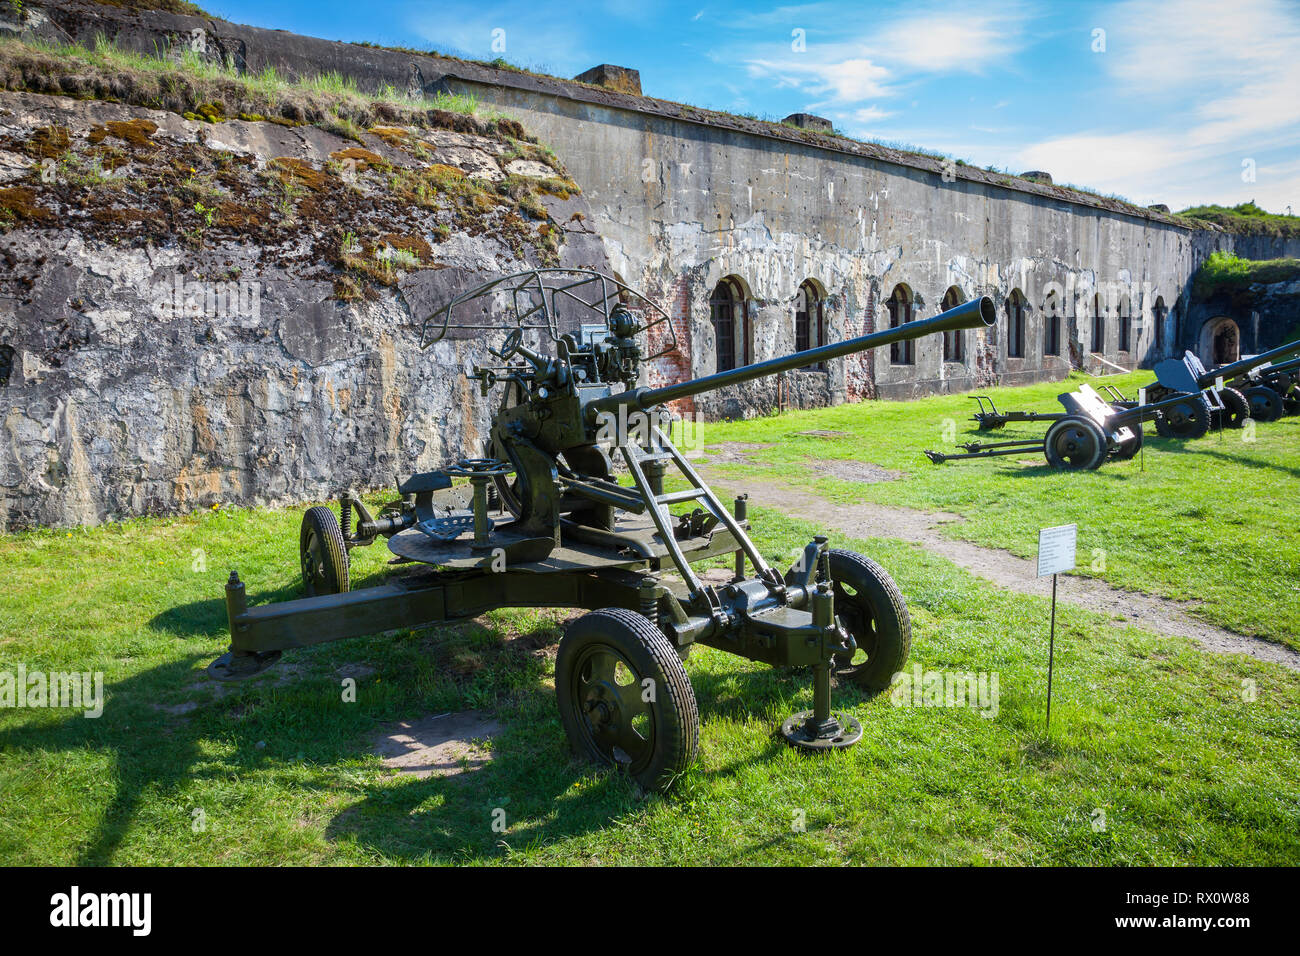 Brest, Belarus - May 12, 2015: The Fifth Fort of Brest Fortress in Belarus. Was built in 1878. Old guns in the foreground. Brest, Belarus. Stock Photo